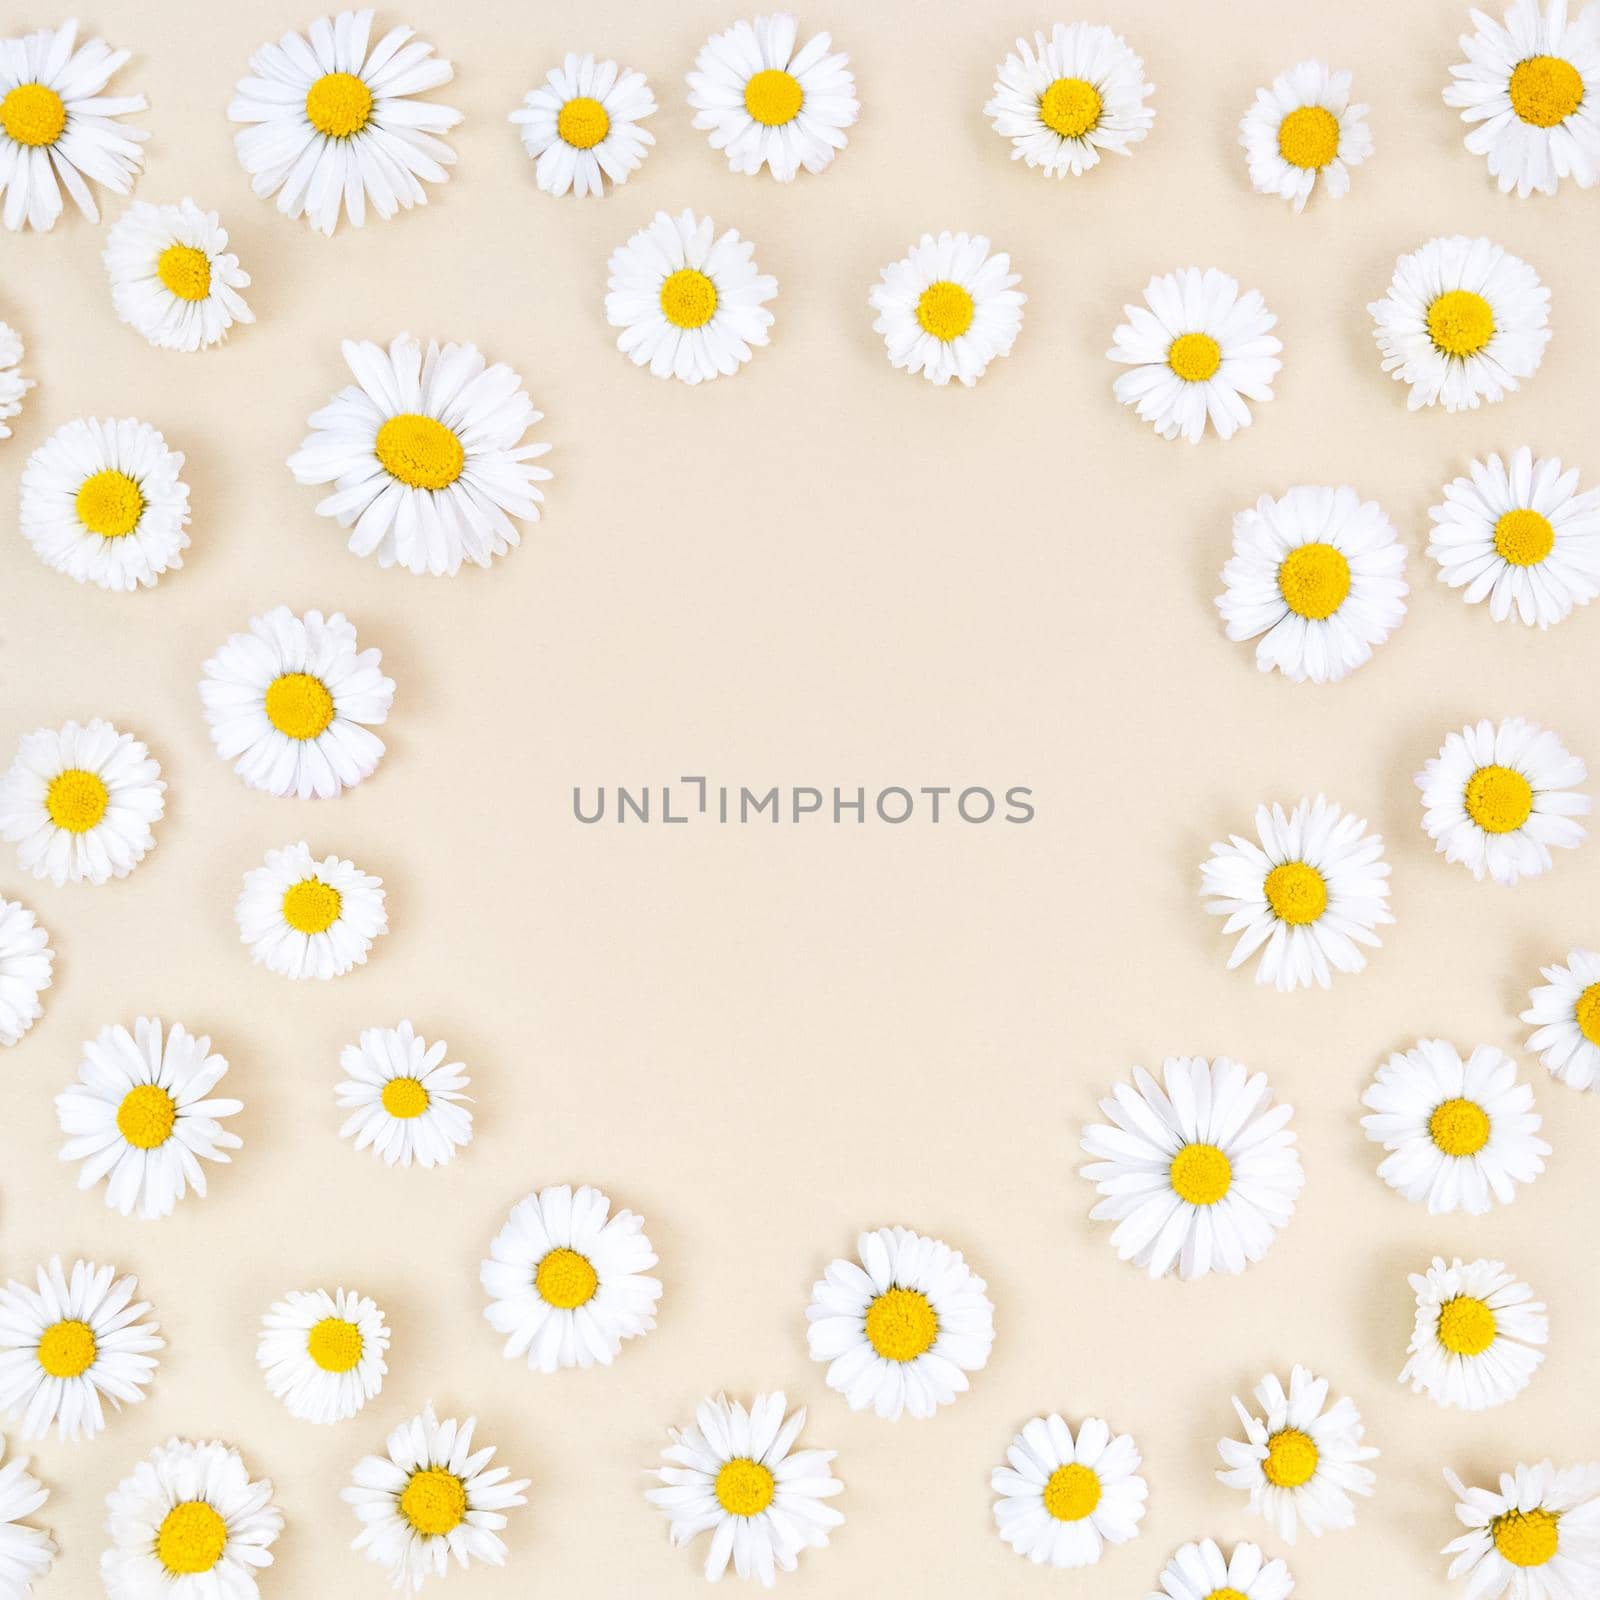 Chamomile flowers on a beige background with round copy space in the middle.